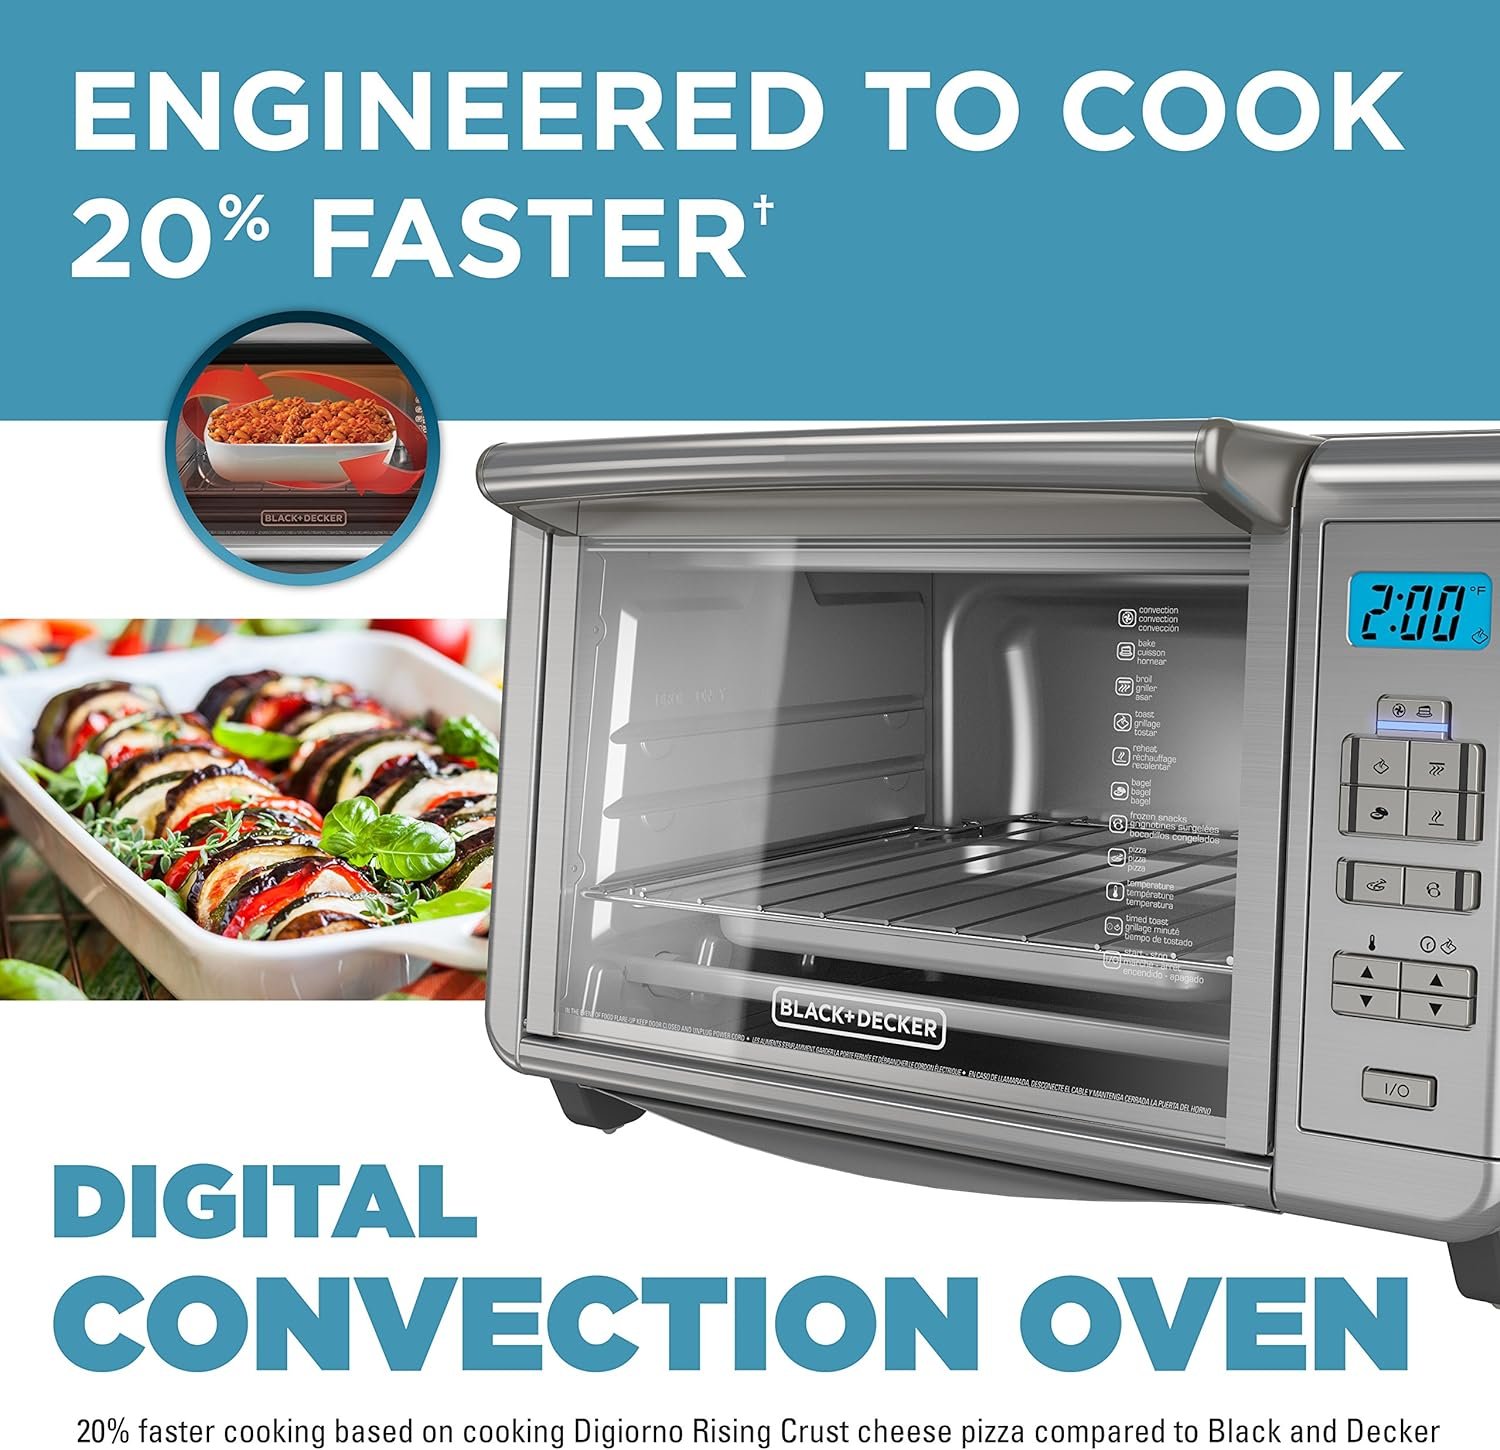 BLACK+DECKER 6-Slice Digital Convection Countertop Toaster Oven, Stainless Steel, TO3280SSD